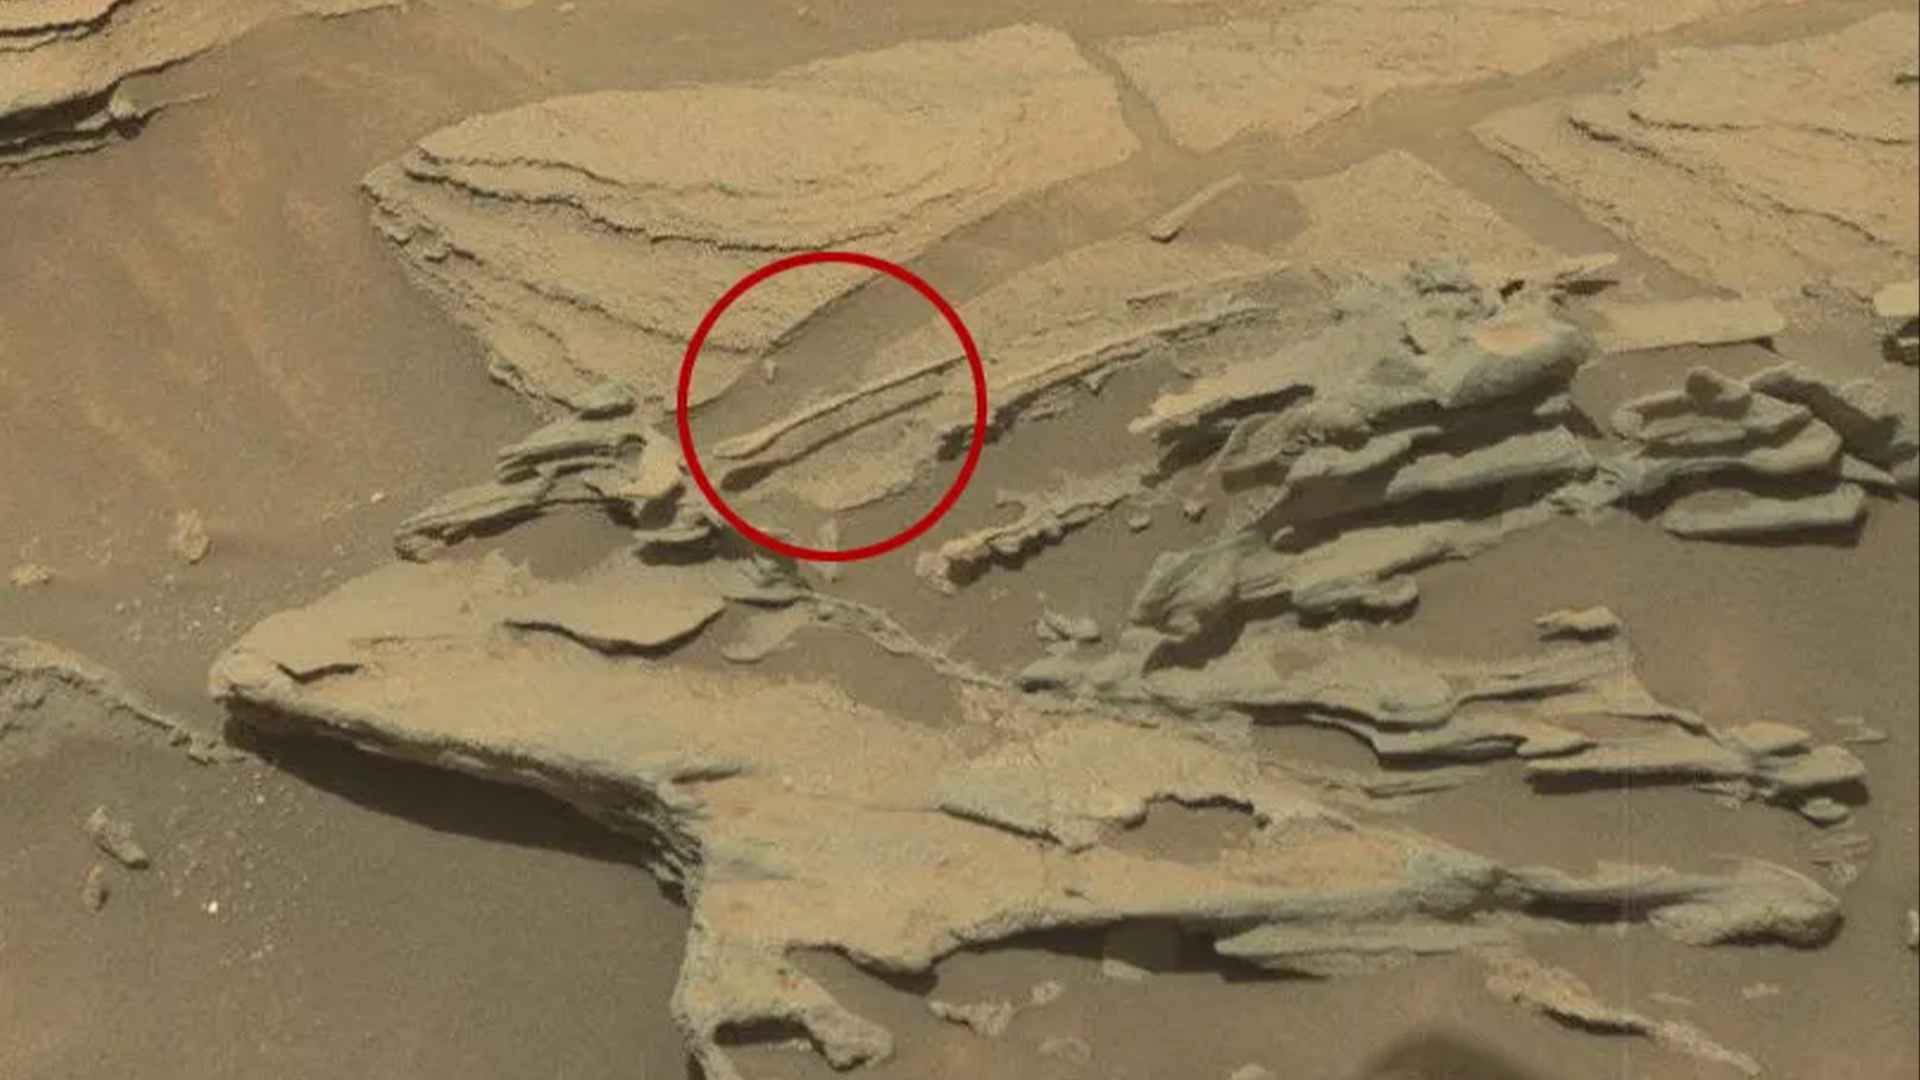 Is that really a floating spoon on Mars or just a strange rock?